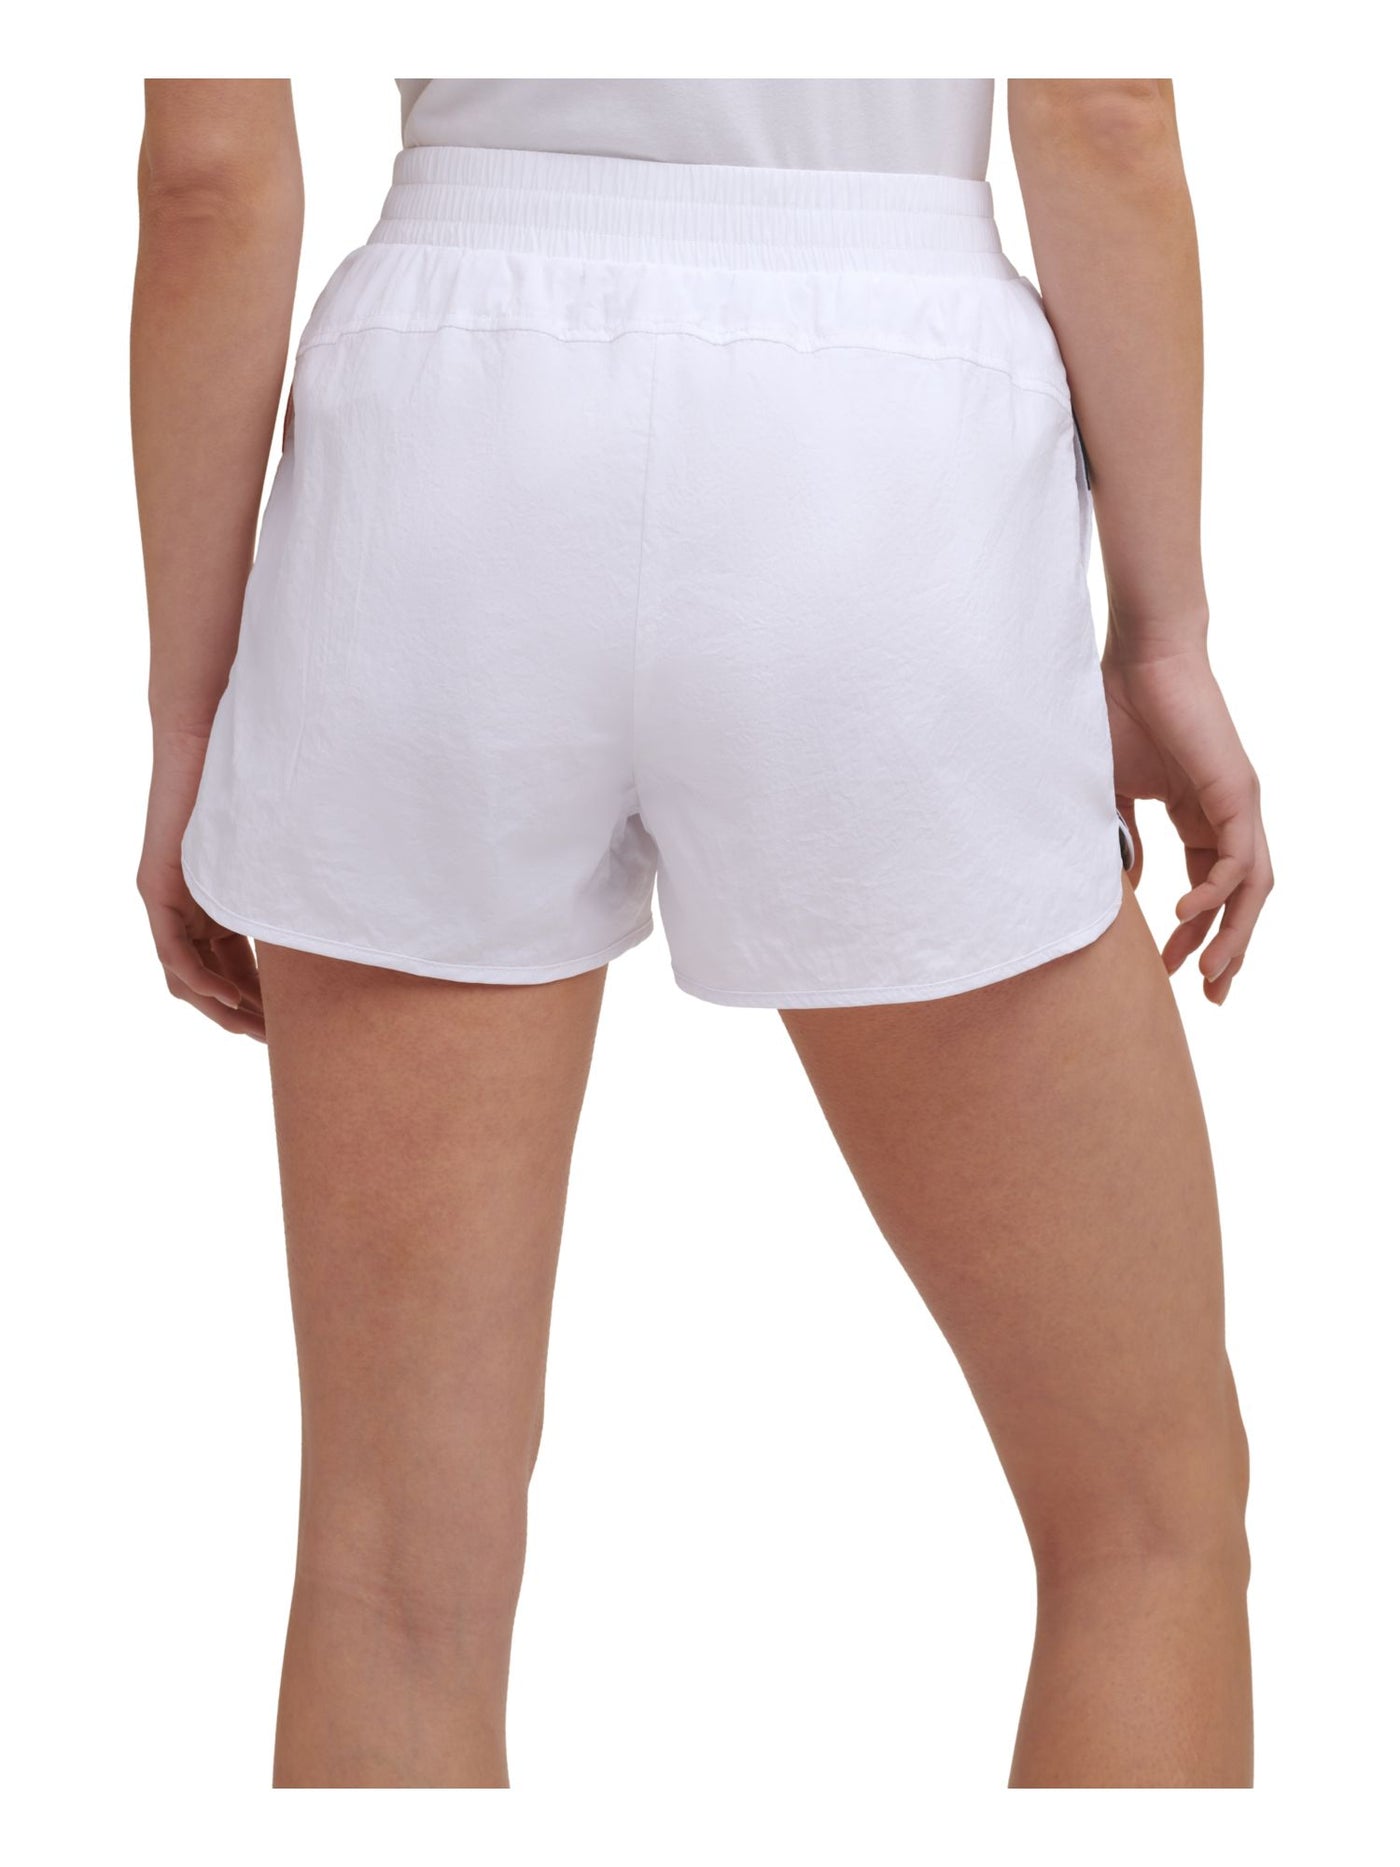 TOMMY HILFIGER Womens White Stretch Active Wear Shorts XS